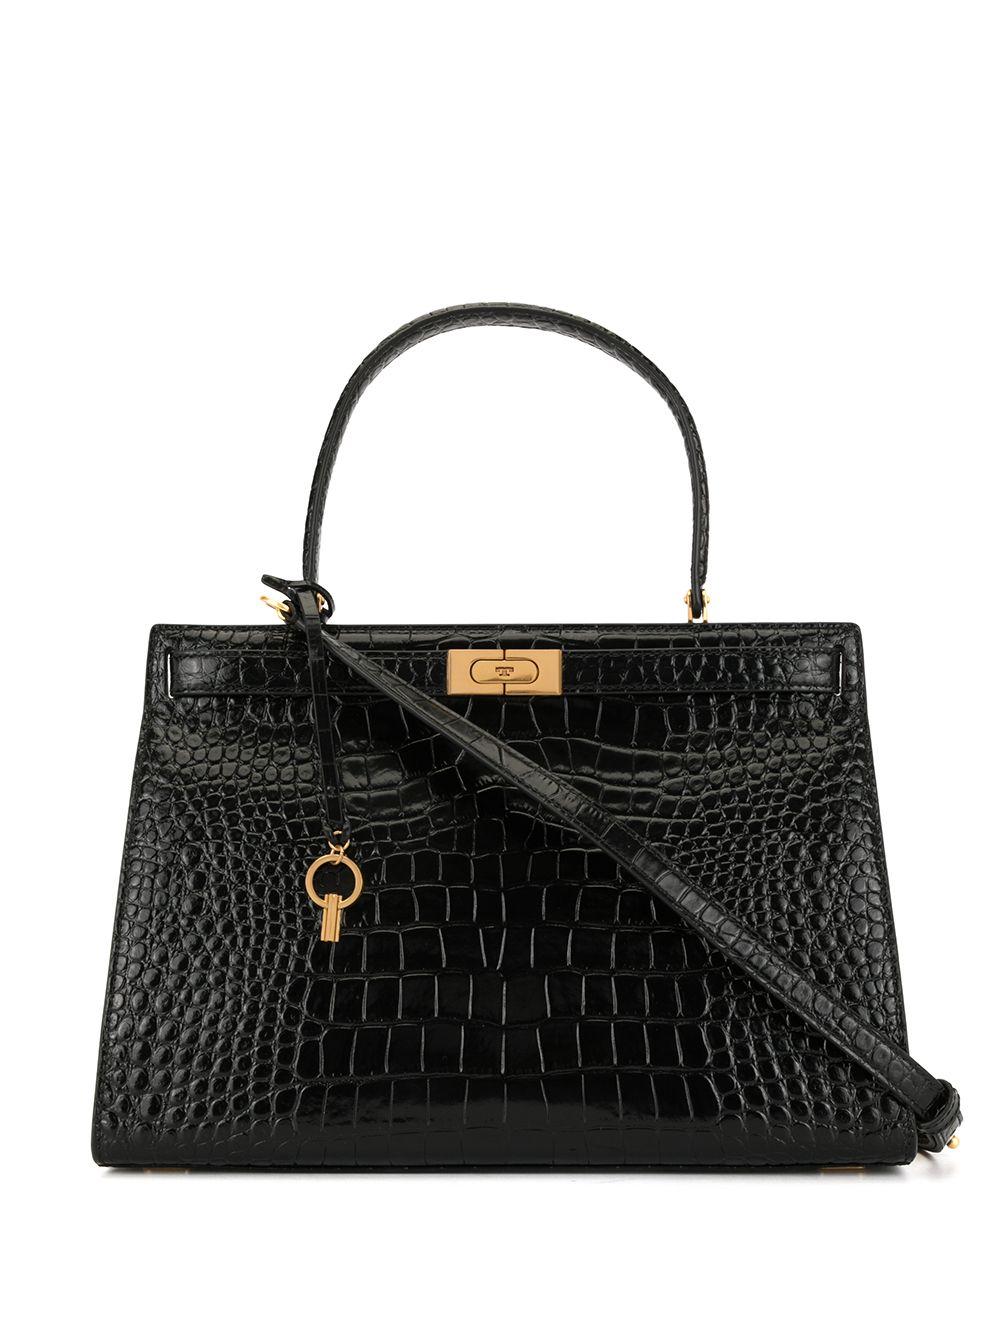 NWT Authentic TORY BURCH LEE RADZIWILL Black Embossed Double Bag LARGE